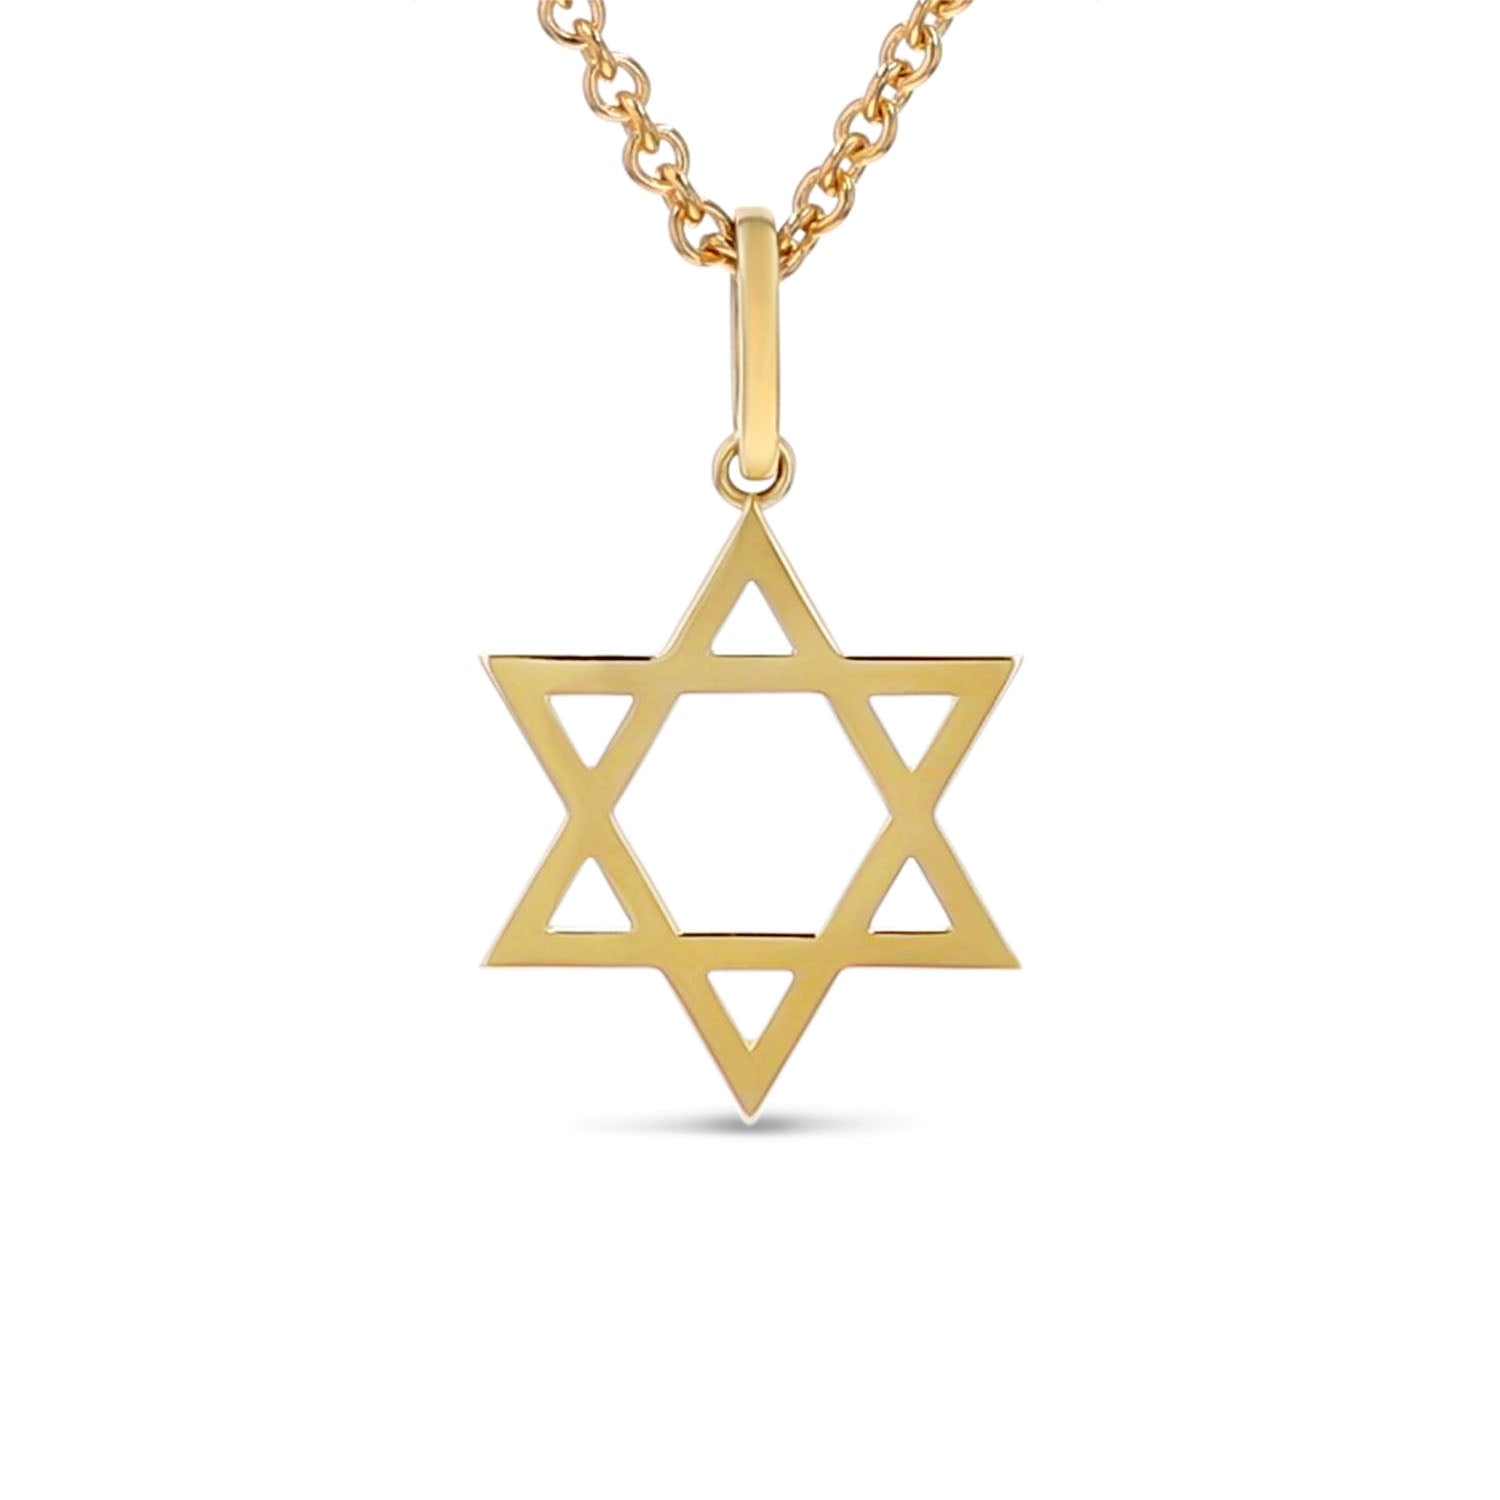 14k Gold 28mm Star of David Pendant on Cable Chain Necklace